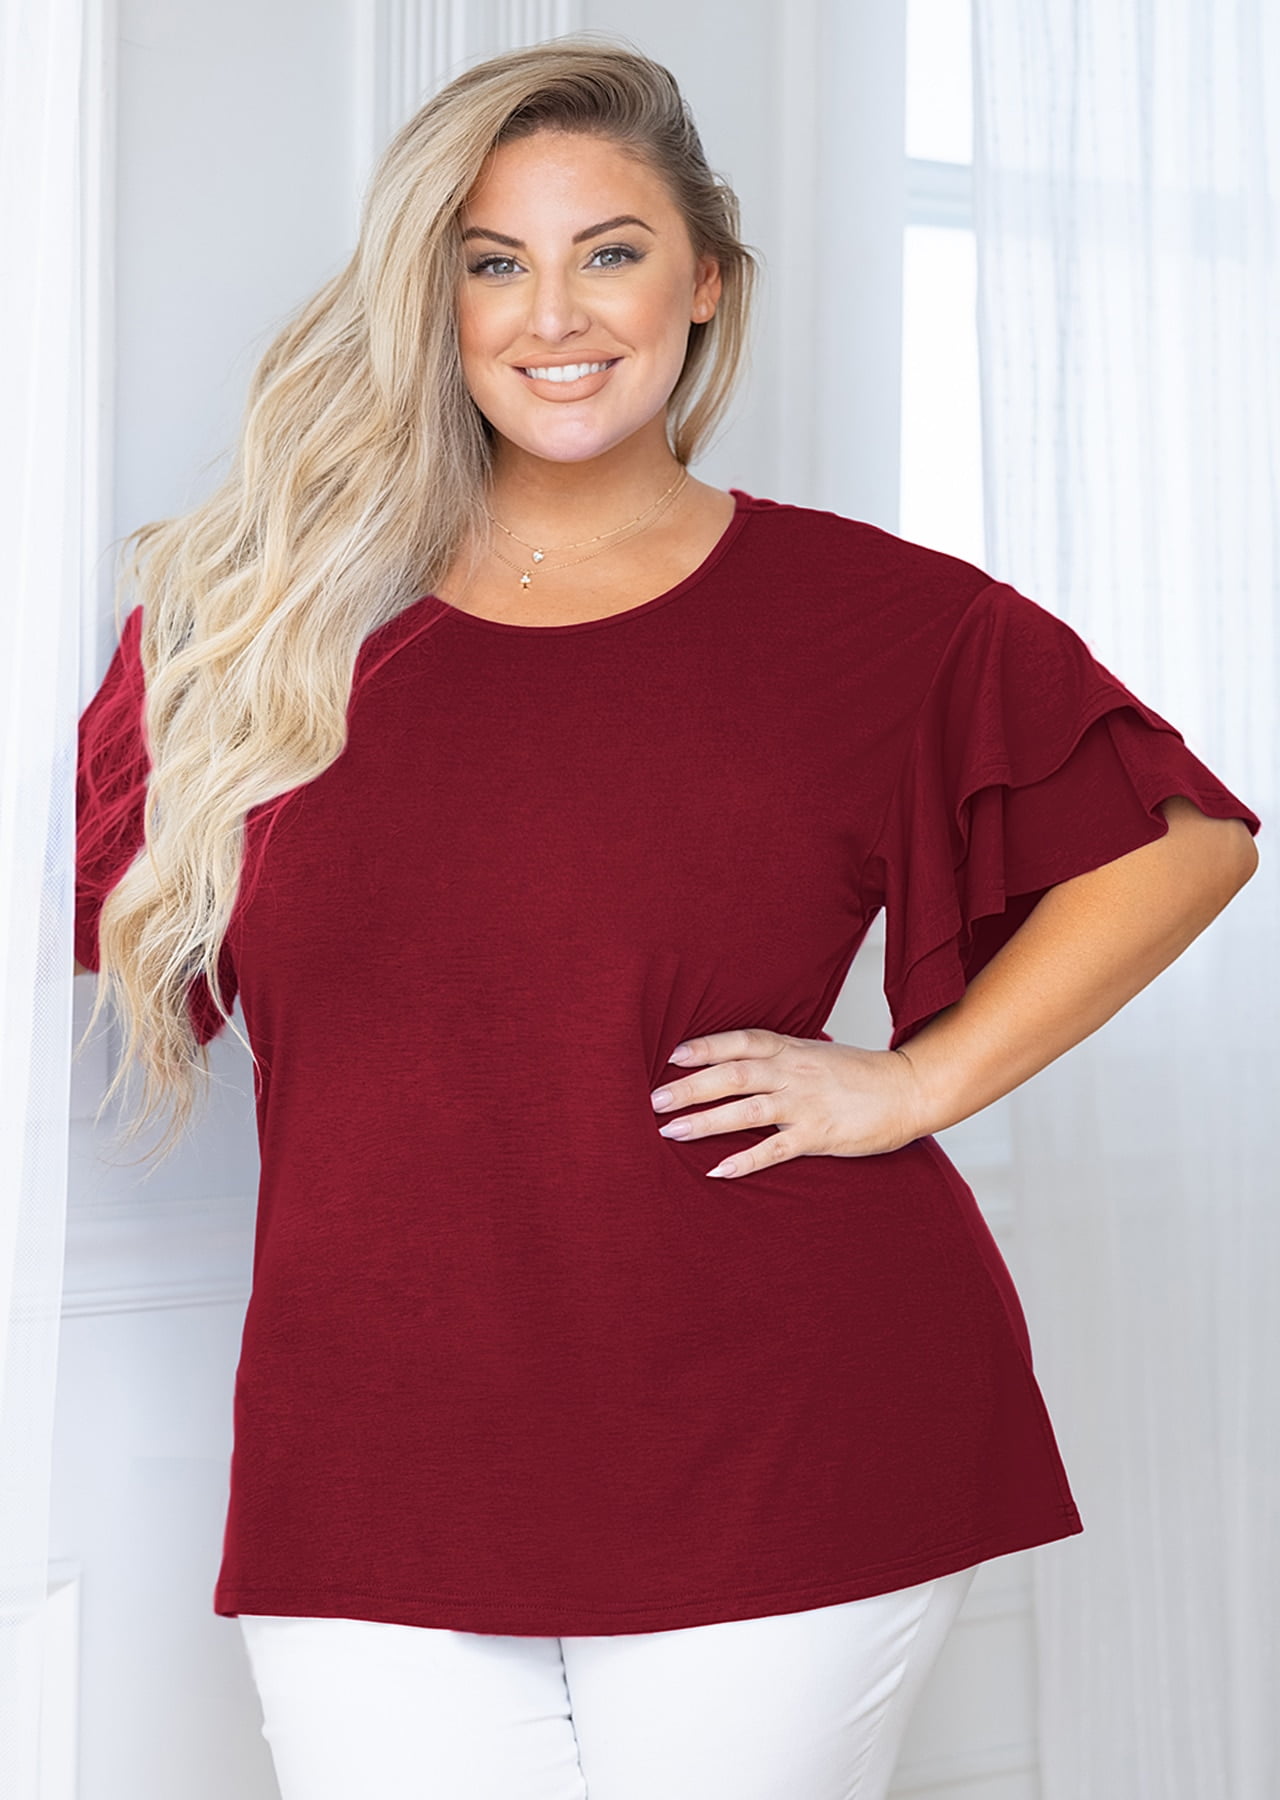 SHOWMALL Plus Size Tops for Women Short Sleeve Burgundy 3X Tunic Shirt  Summer Clothing Loose Fitting Clothes 